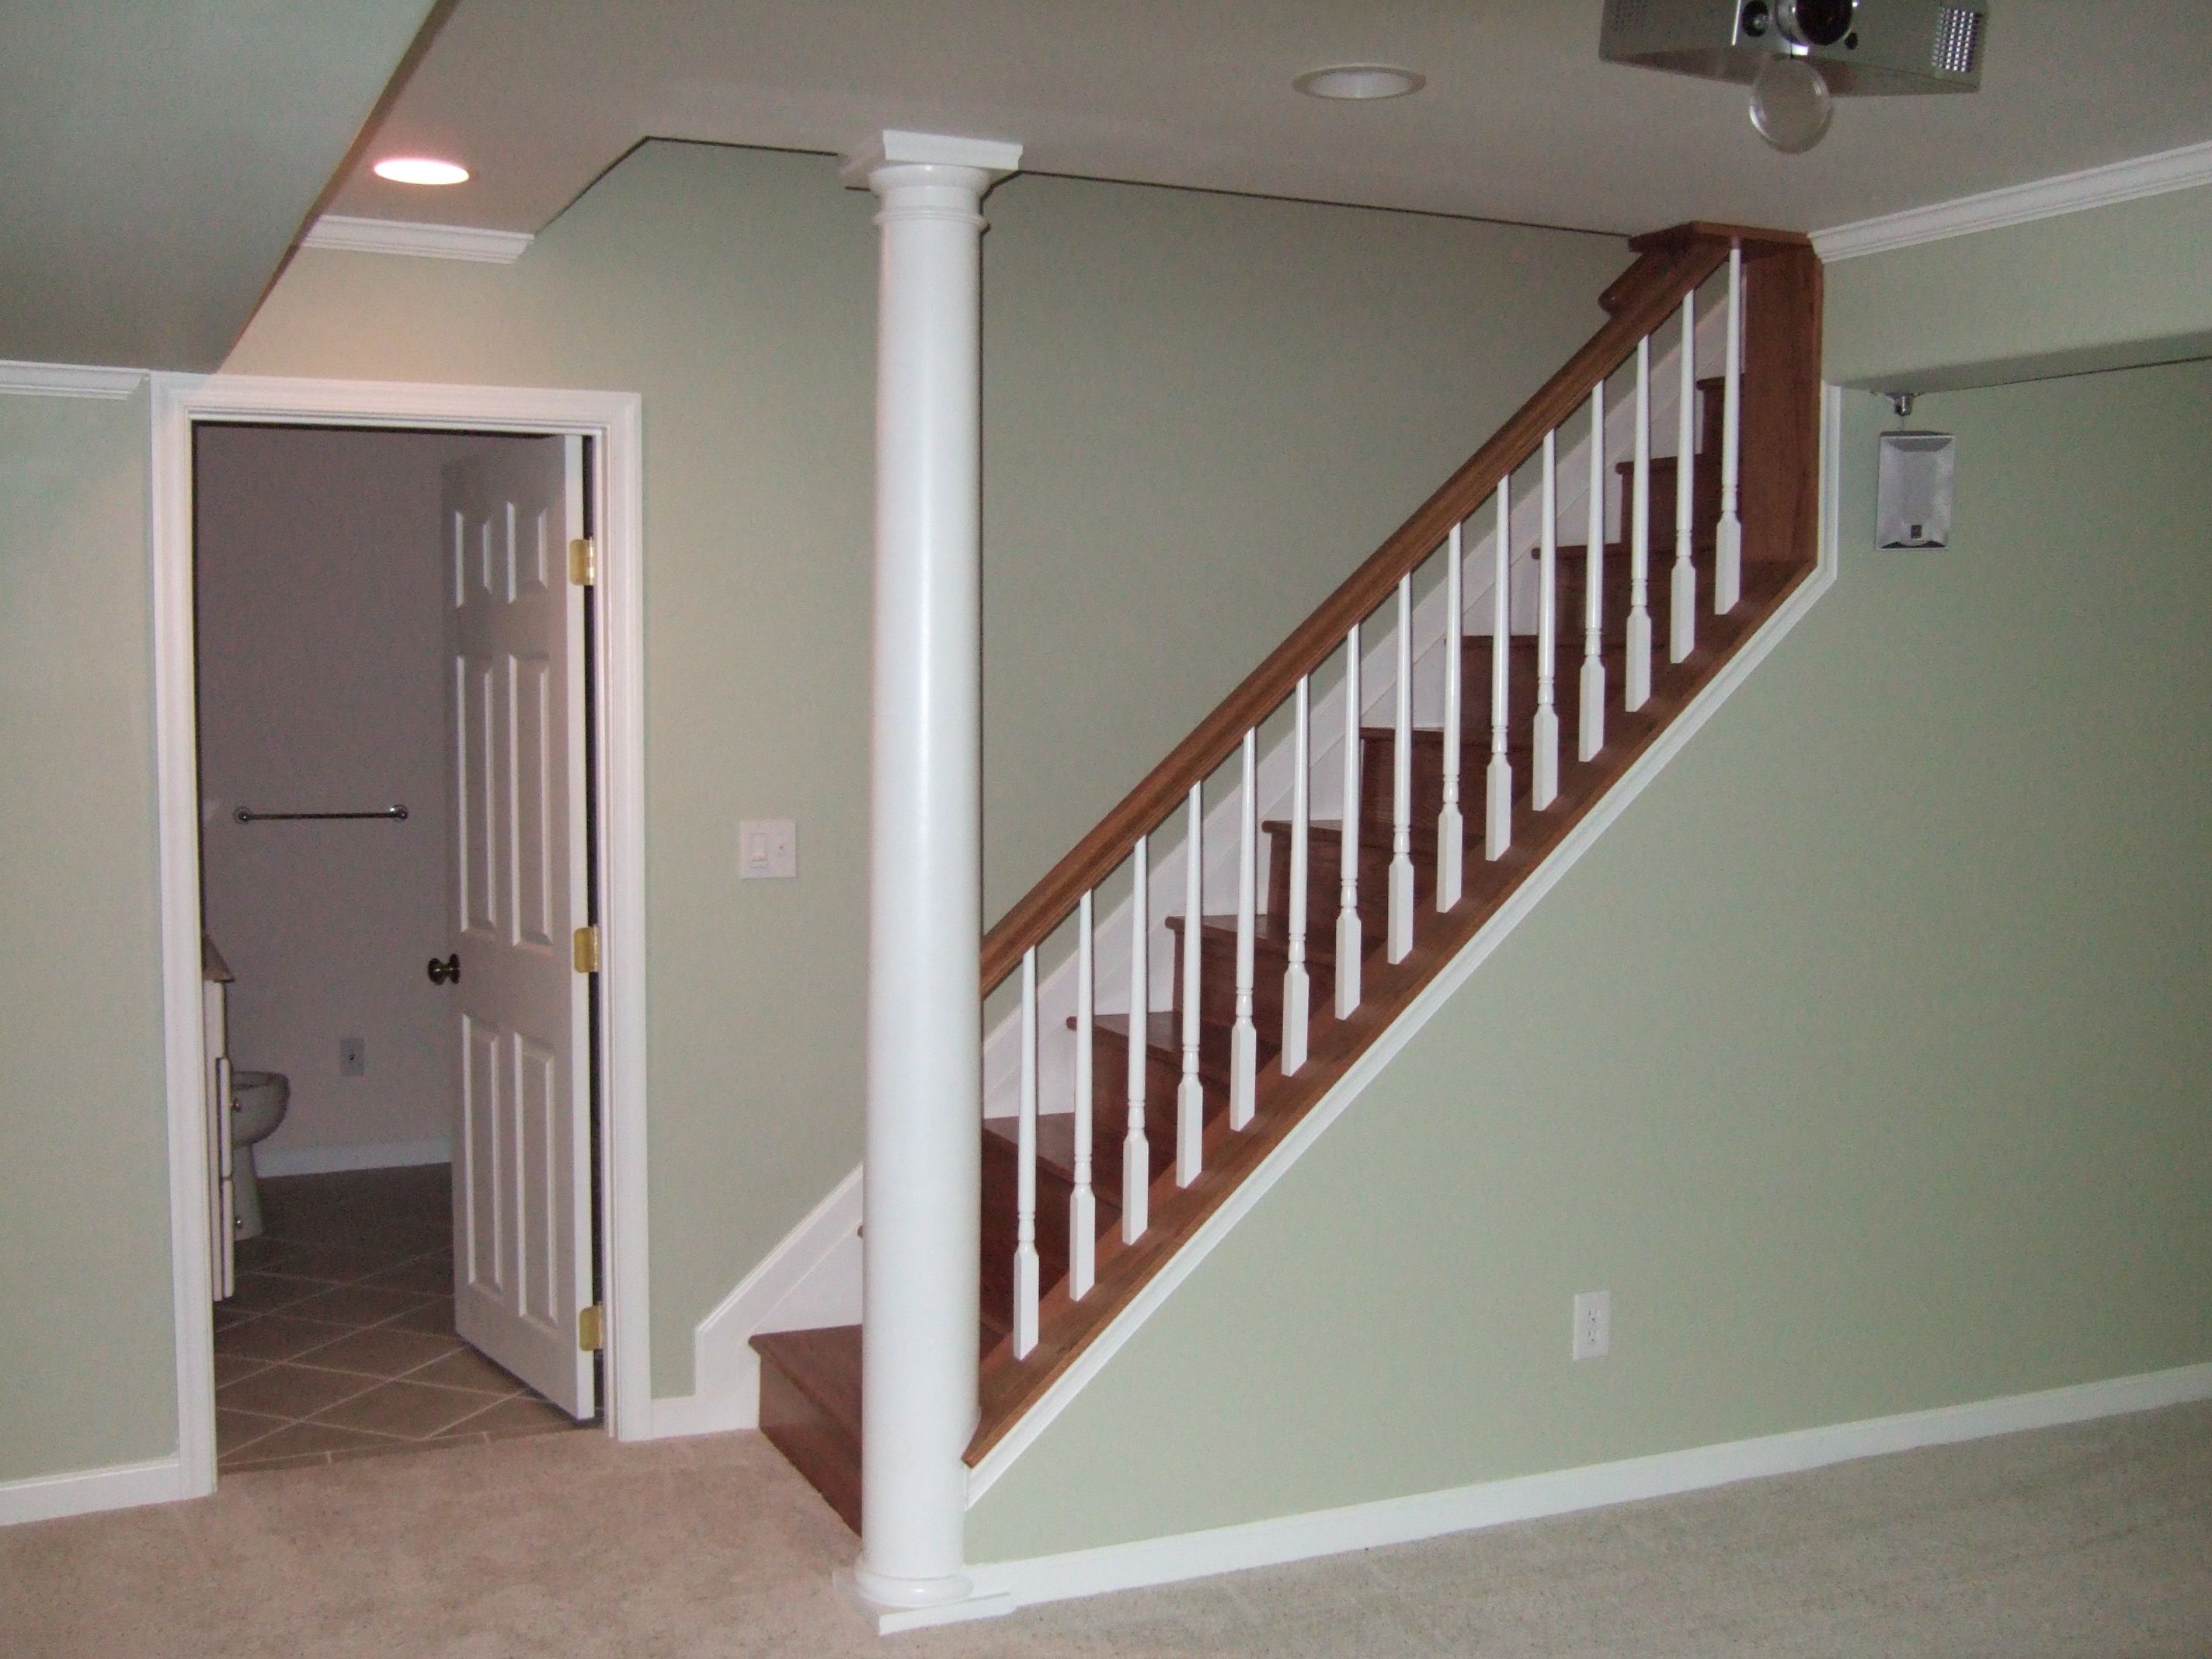 Stair case hallway how to finish